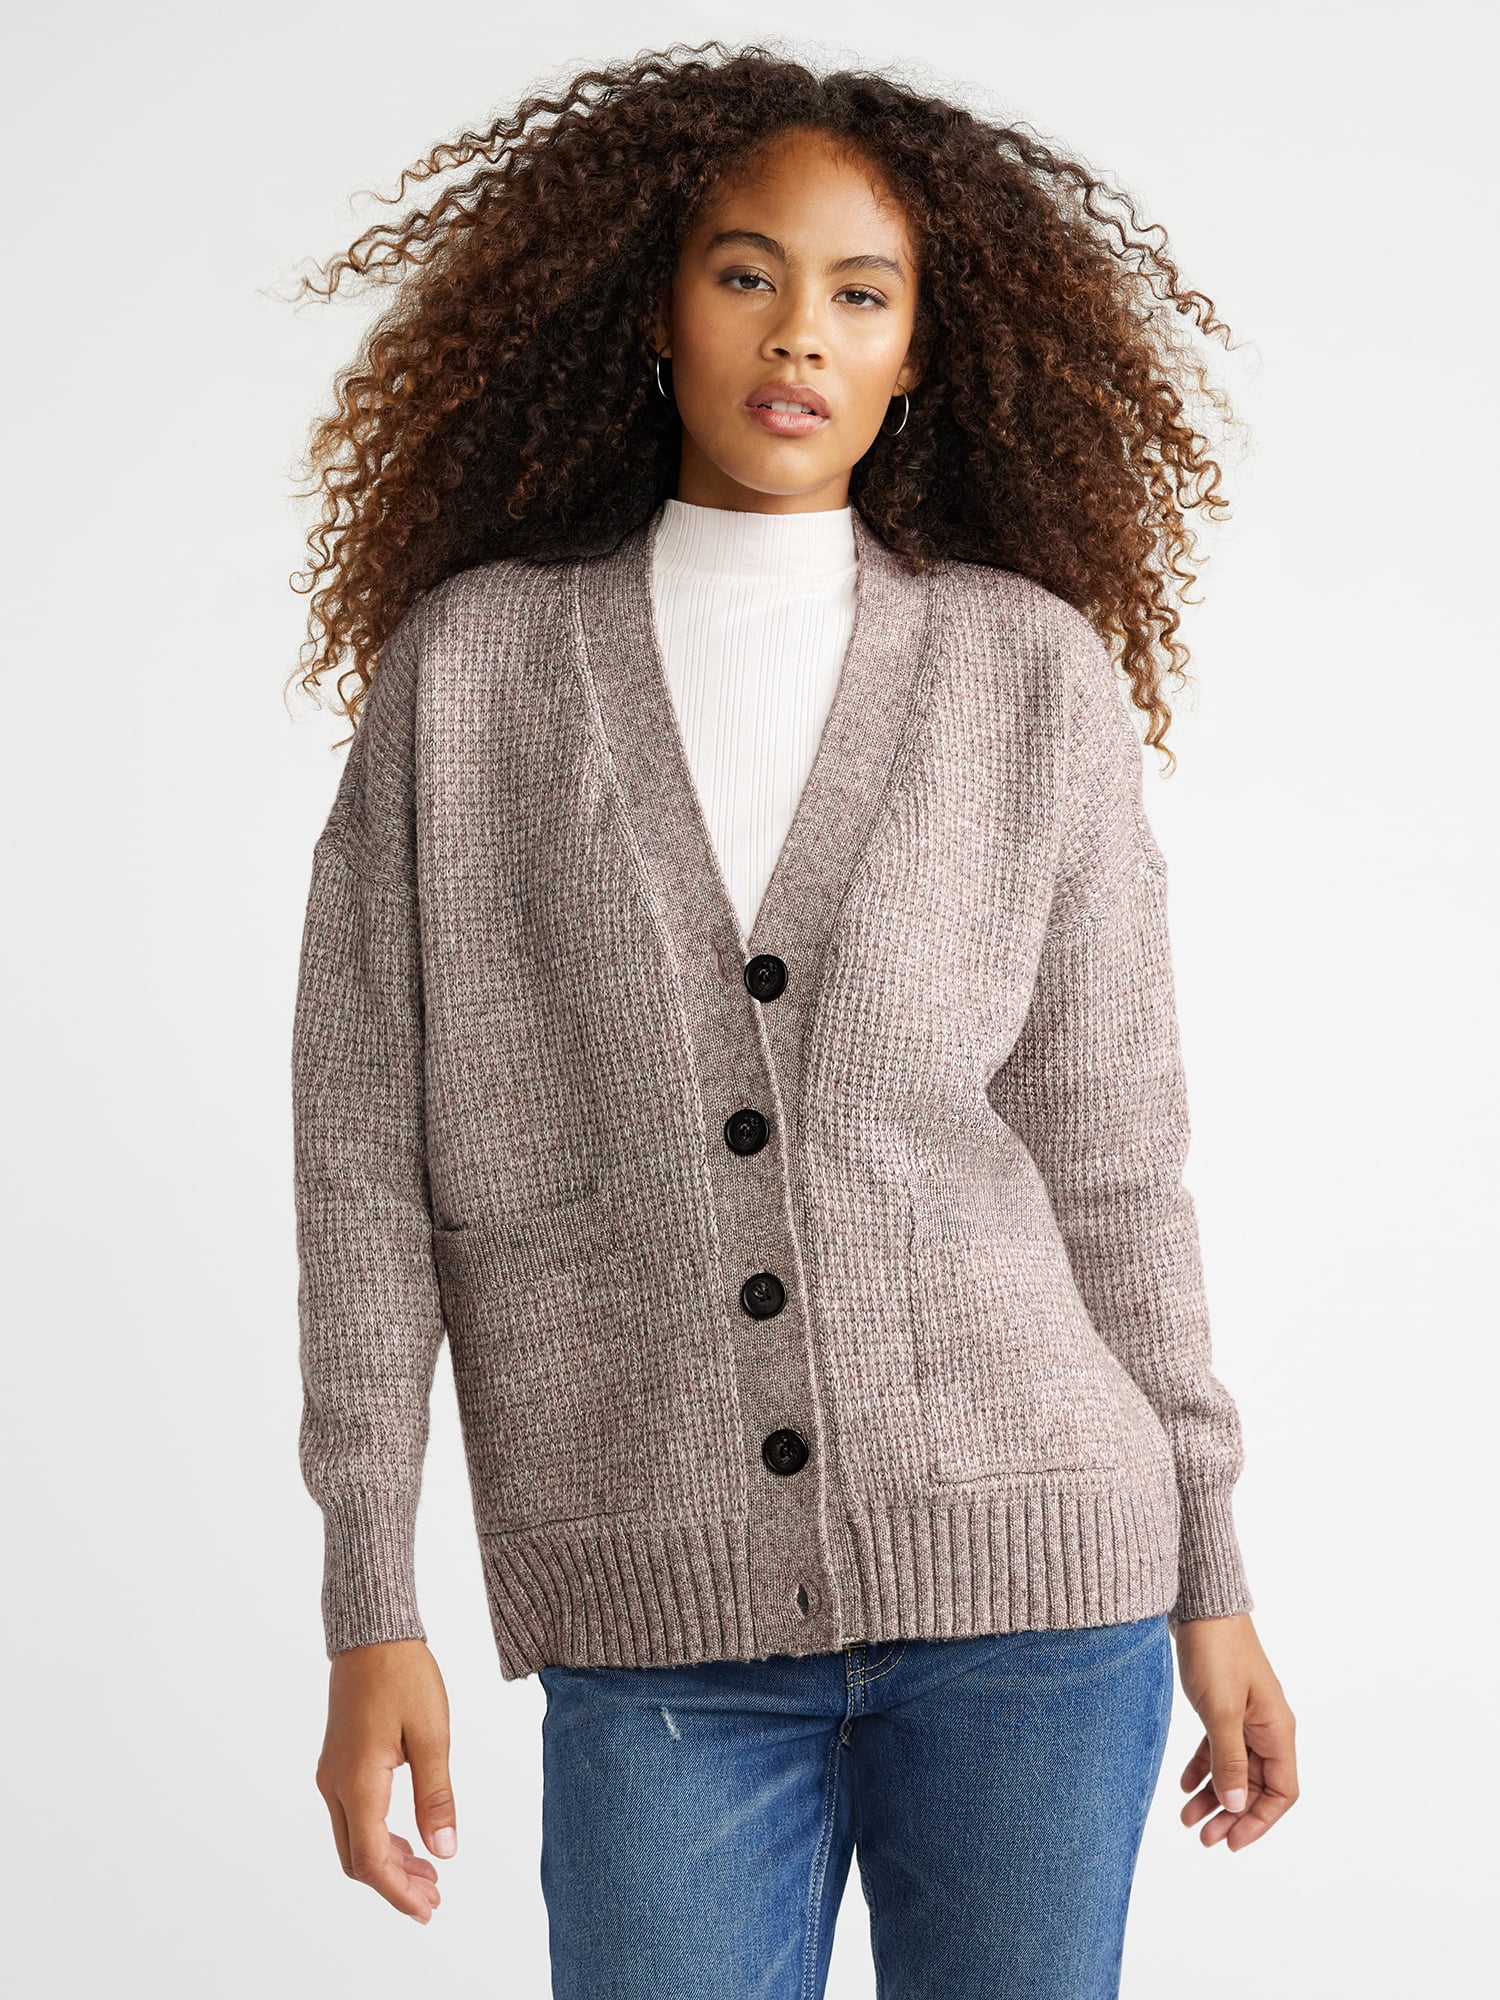 Free Assembly Women's Grandpa Cardigan Sweater with Long Sleeves ...